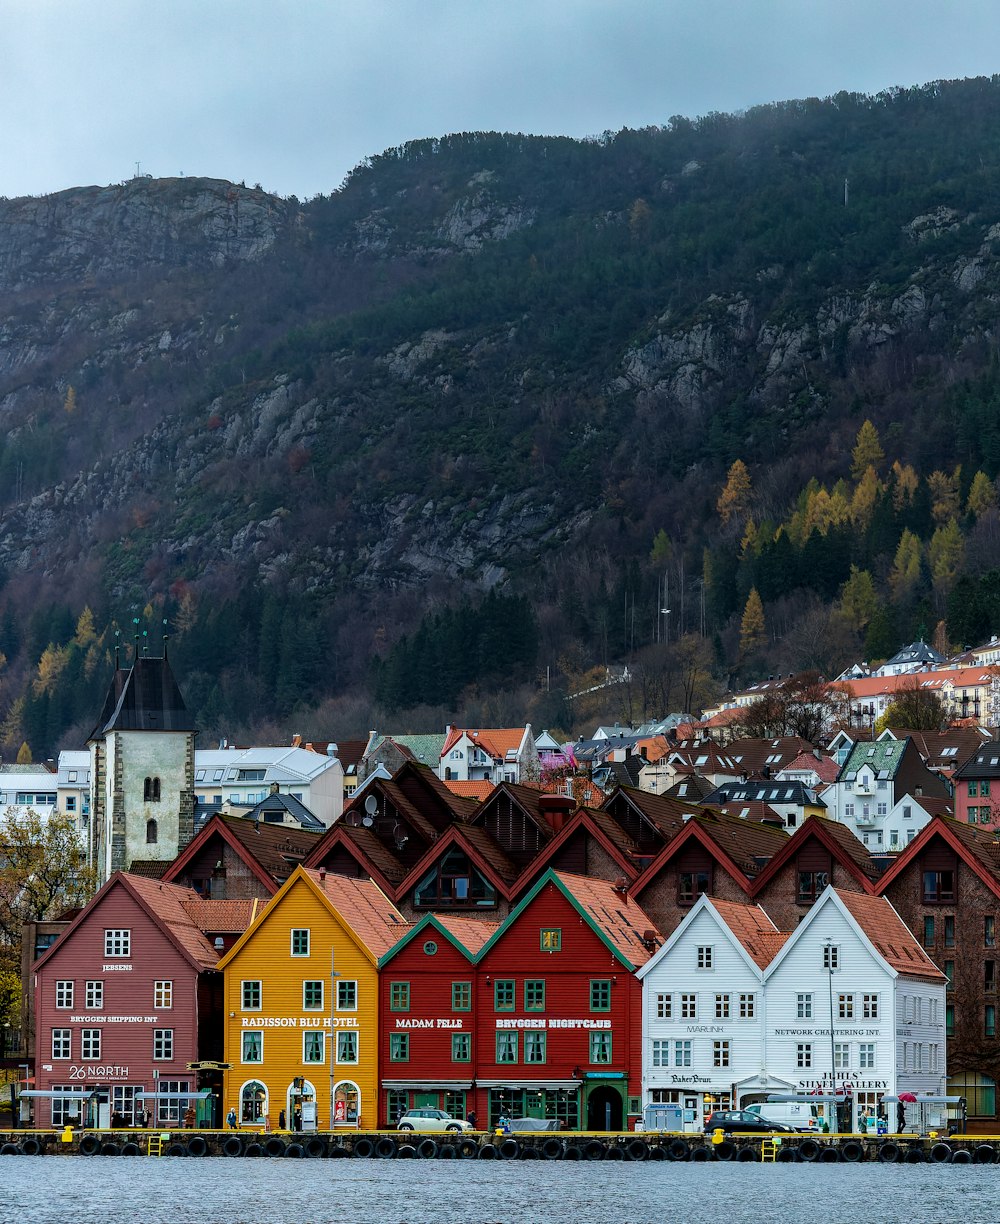 a row of colorful houses next to a body of water